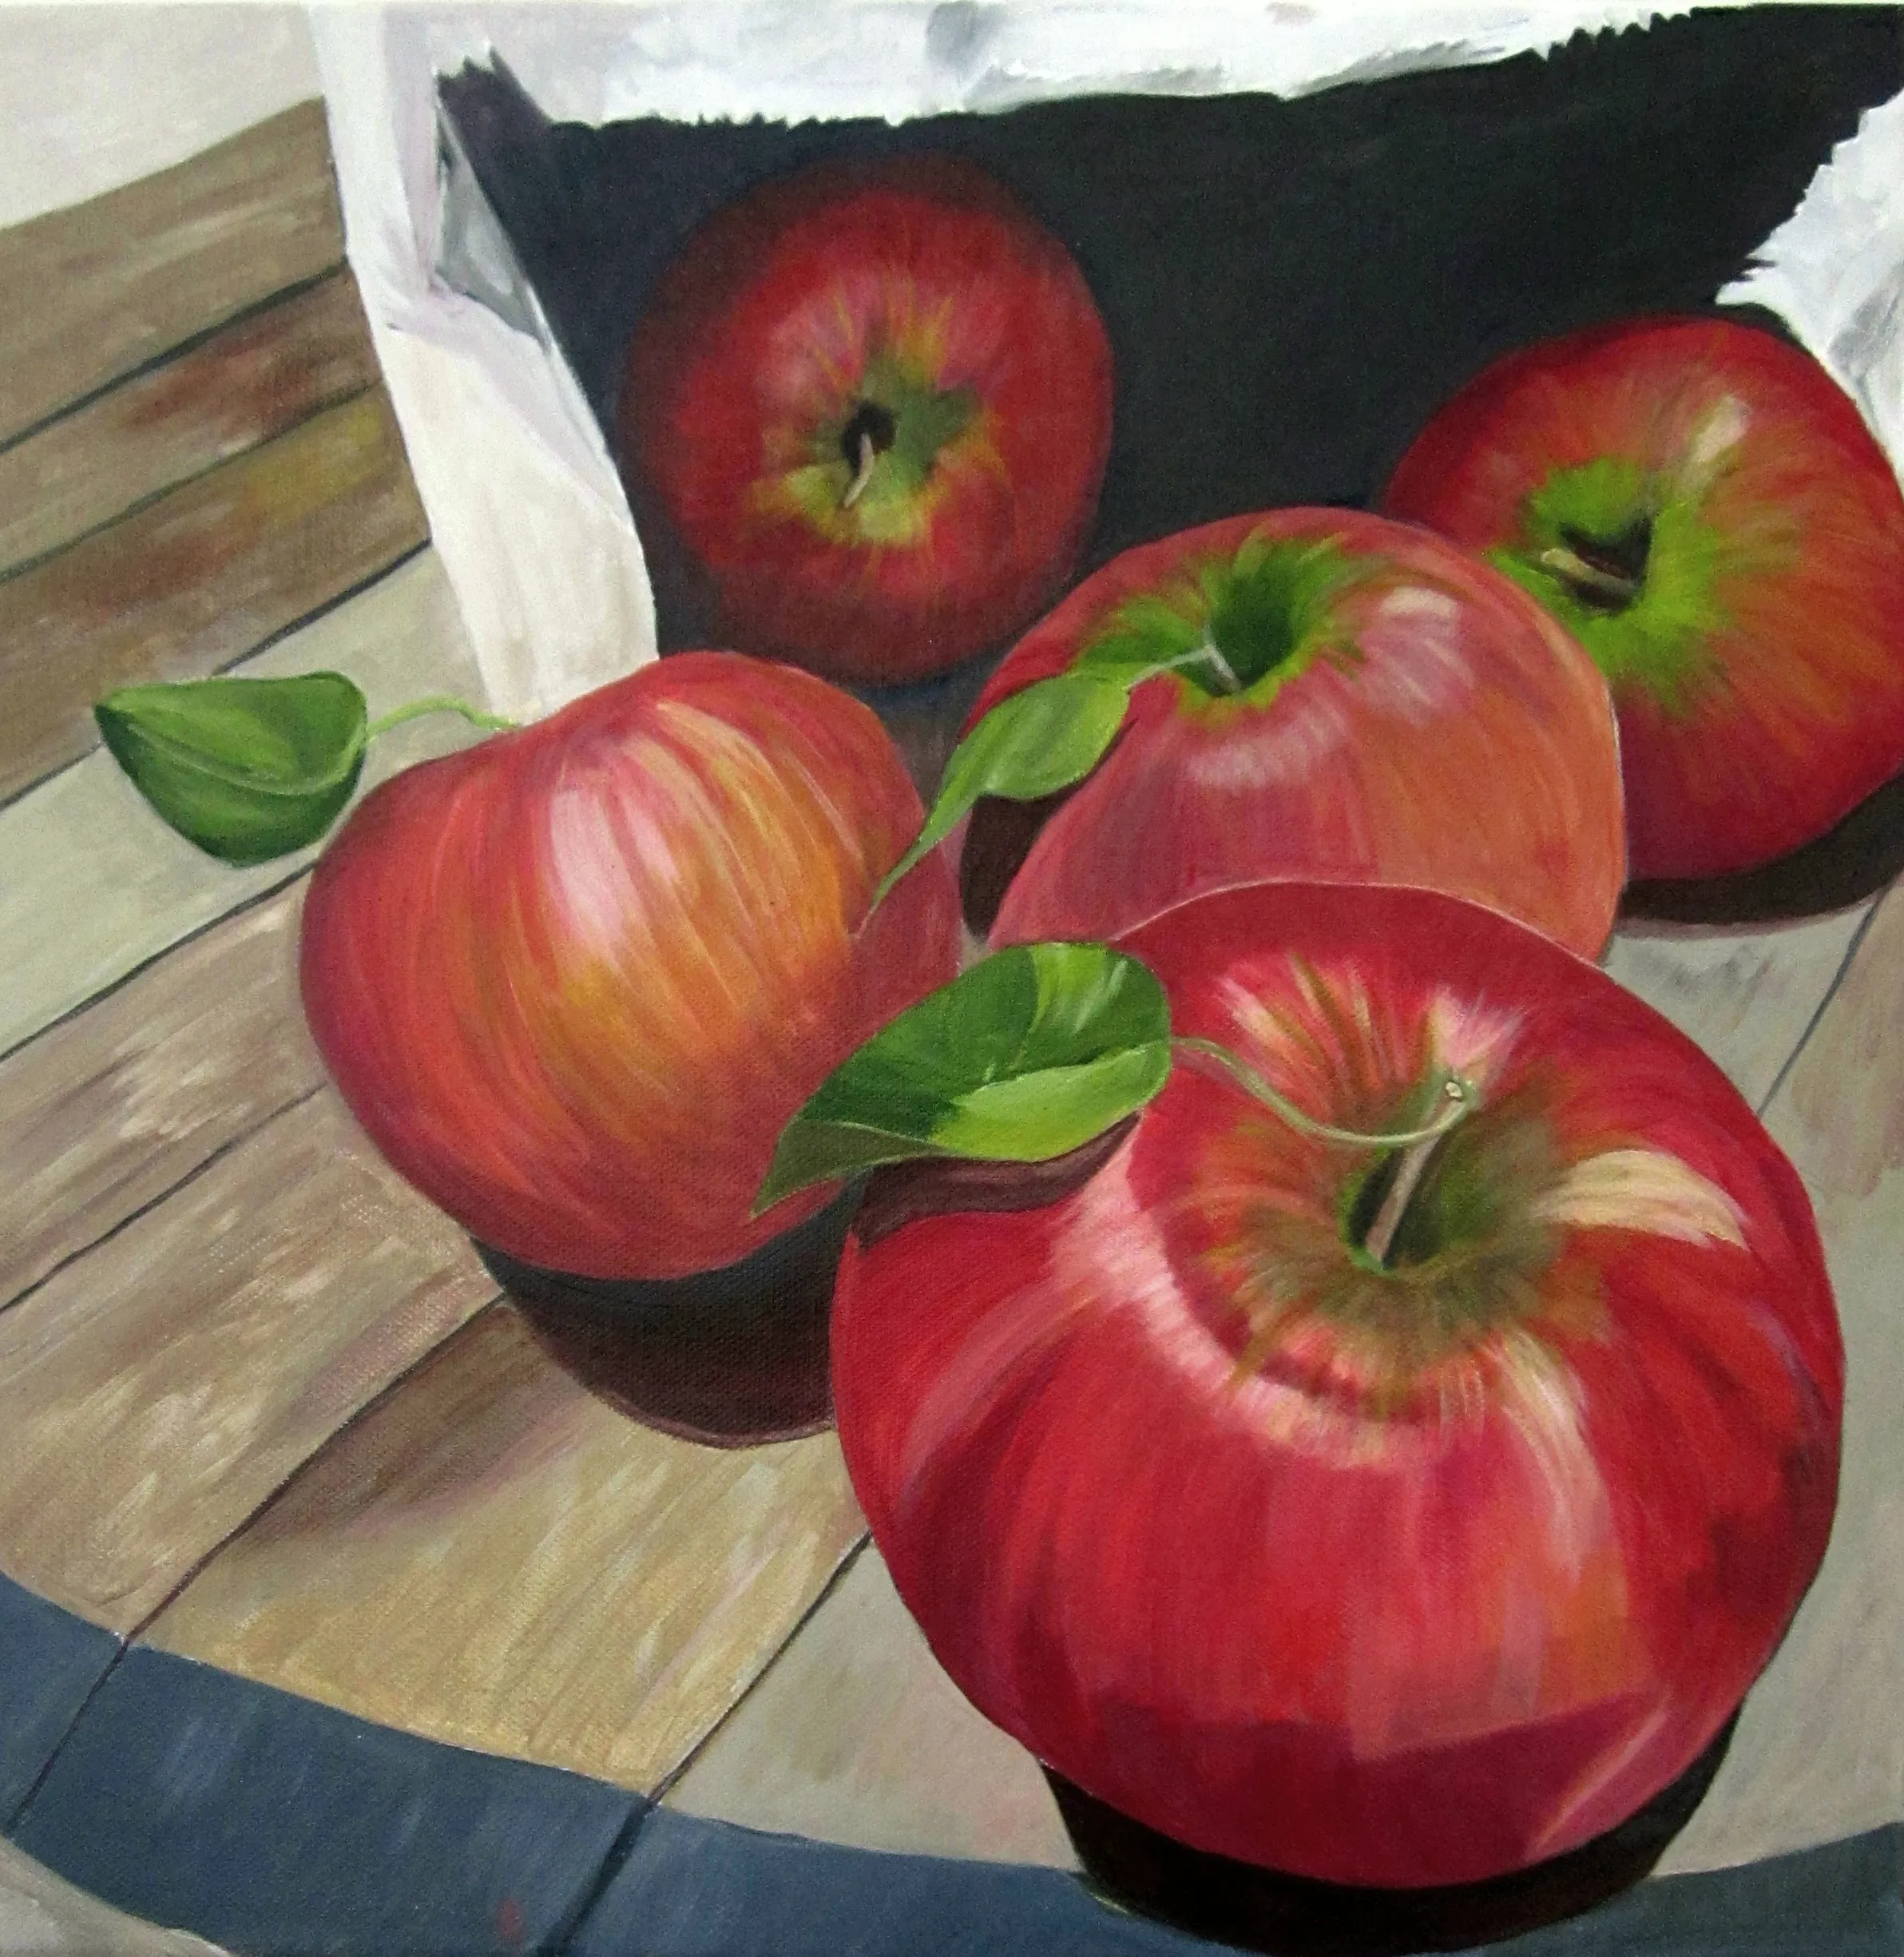 acrylic painting of red delicious apples by artist Shona Jones